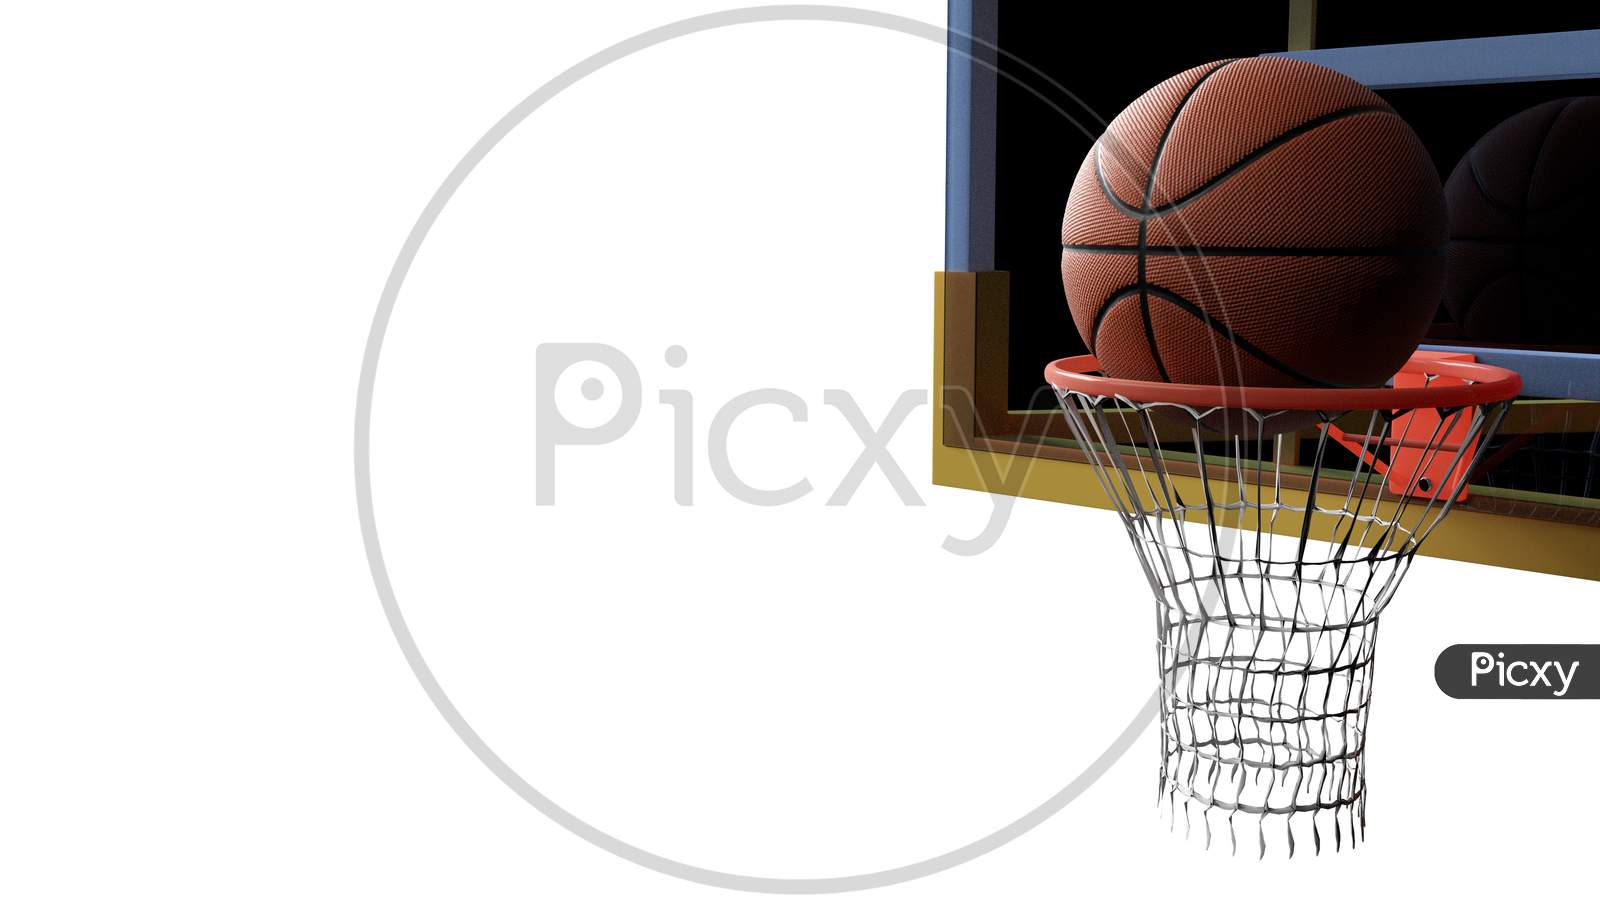 Basketball Going Into Hoop On White Isolated Background. Sport And Competitive Game Concept. 3D Illustration.